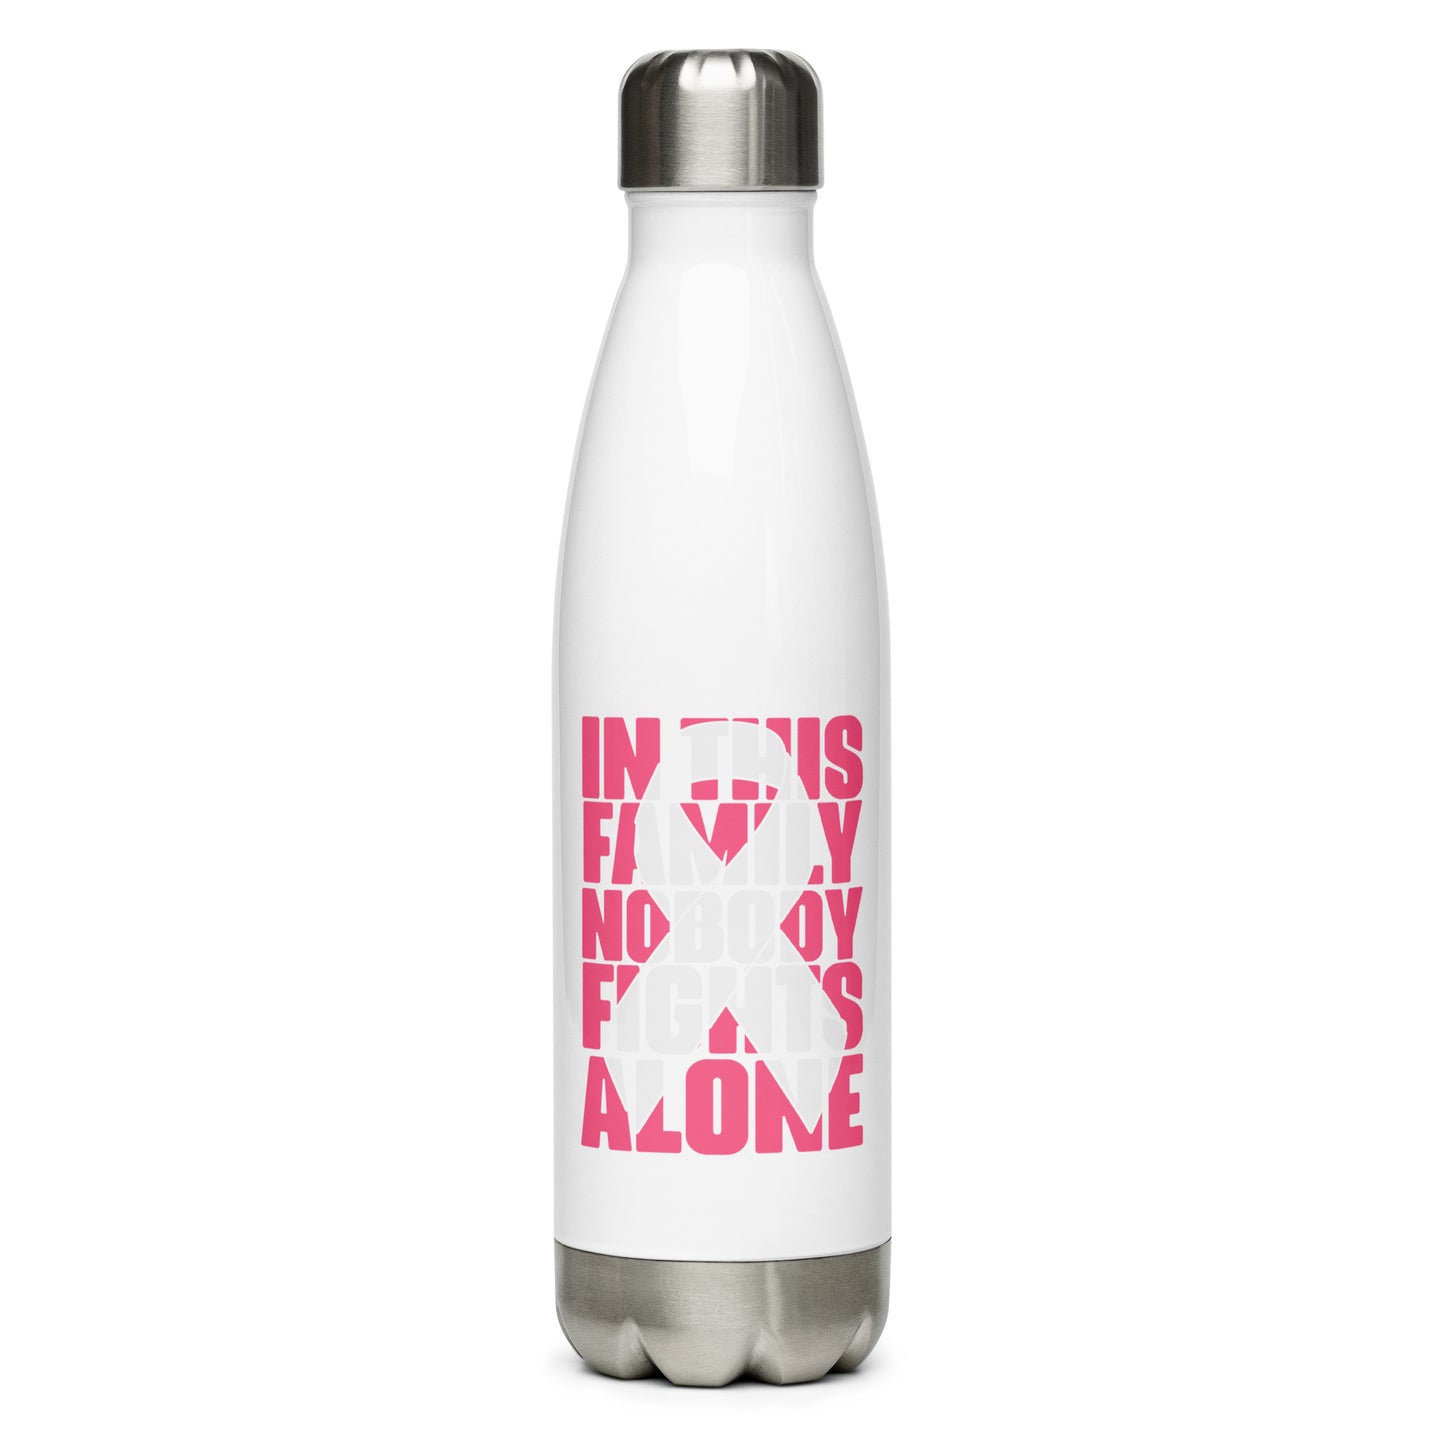 In This Family Nobody Fights Alone Stainless Steel Water Bottle